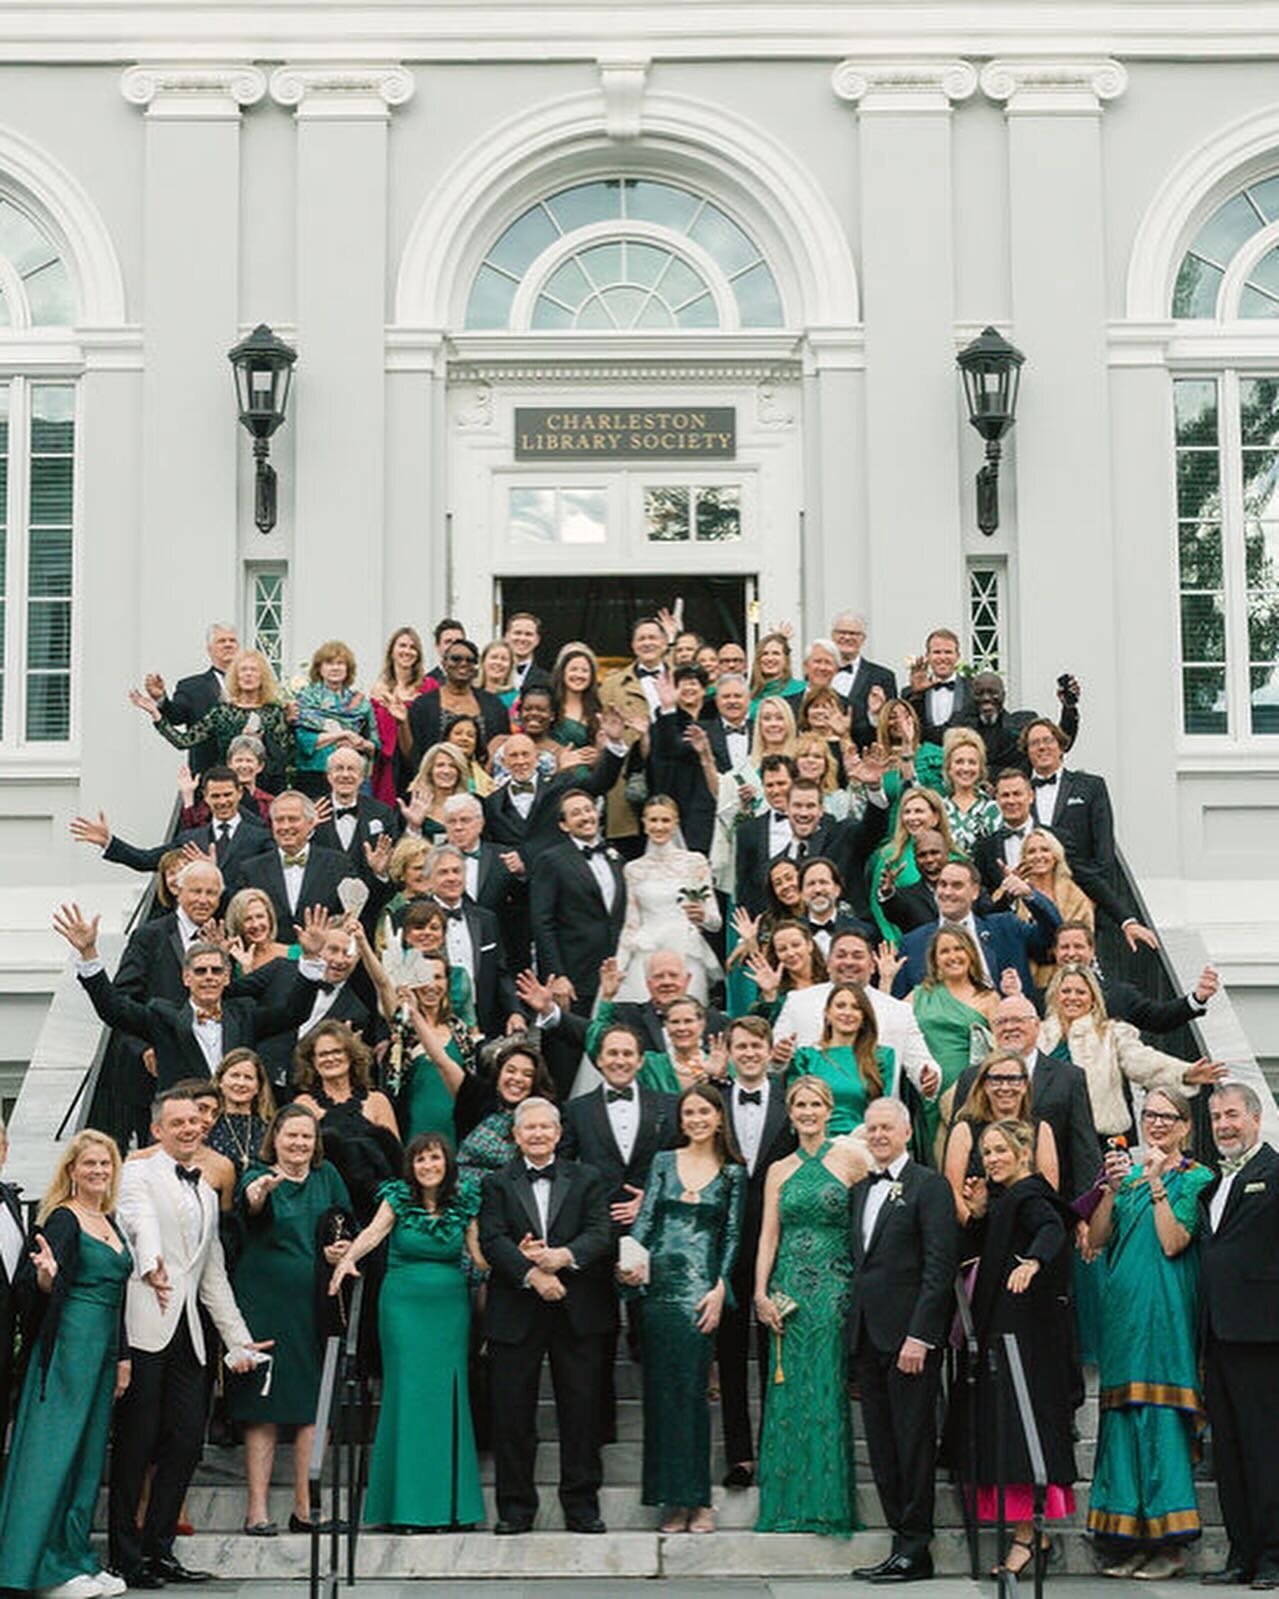 When the dress code is &ldquo;emerald&rdquo; 🤩

This entire weekend was an homage to precious stones, culminating in an emerald reception at the Gibbes Museum. The guests and their fashion did not disappoint! 

Enjoy an array of jade, malachite, and